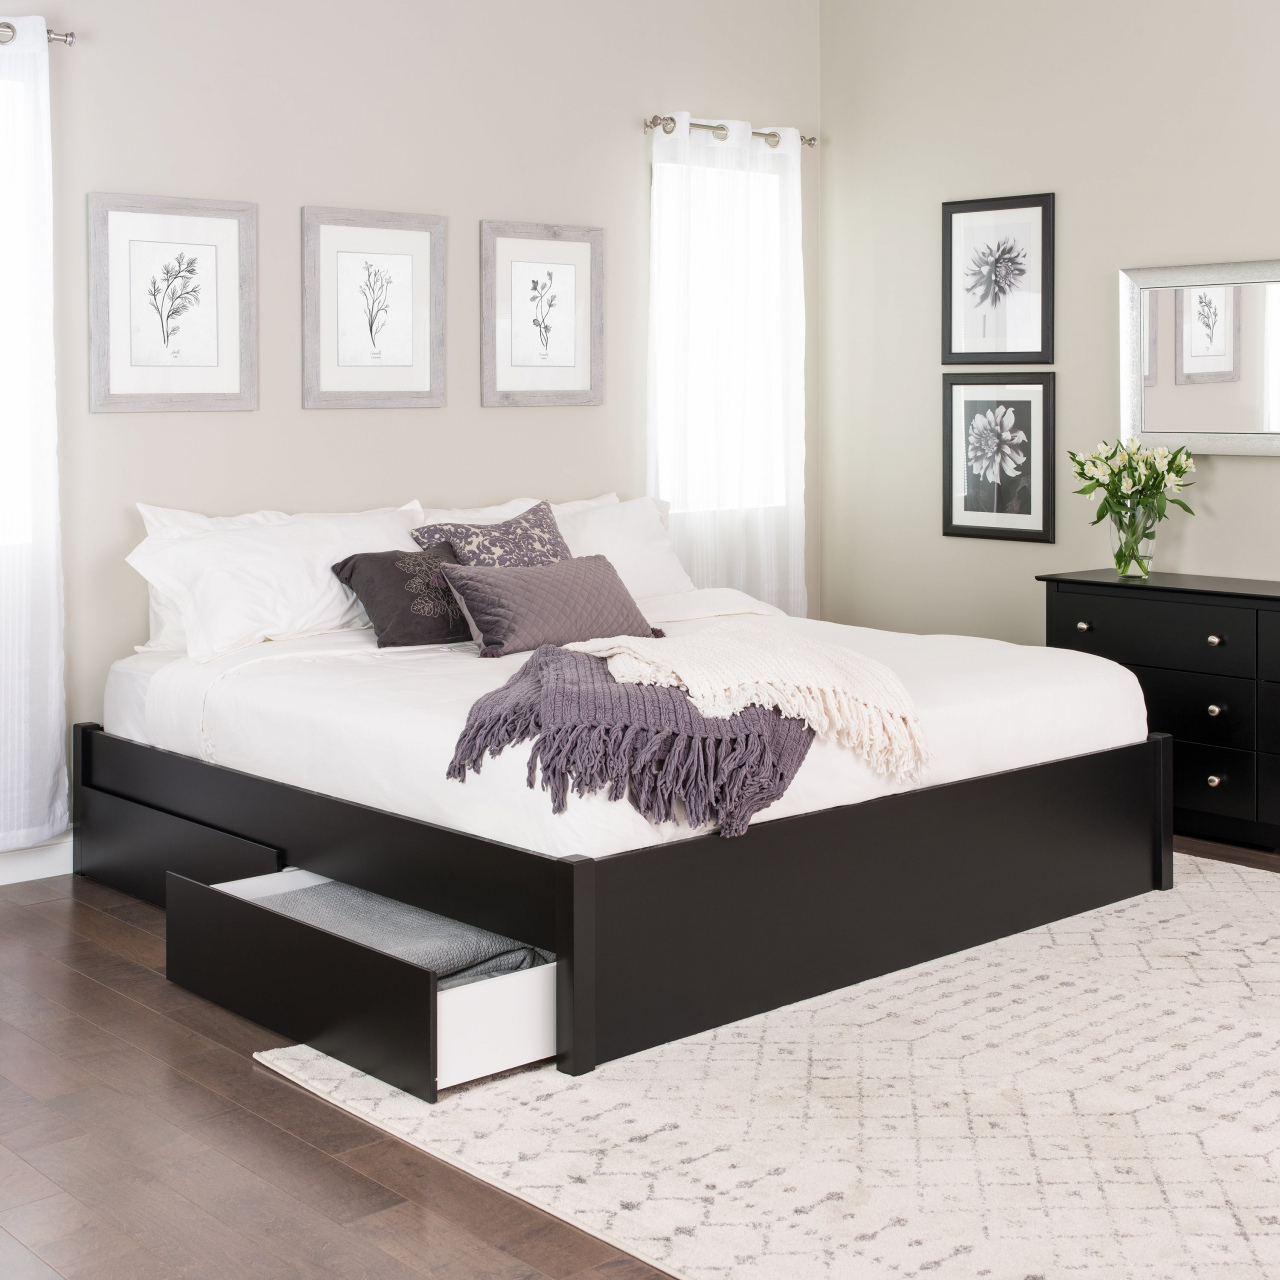 King Size Bedroom Sets For Small Rooms Prepac Queen Select 4 Post for measurements 1280 X 1280